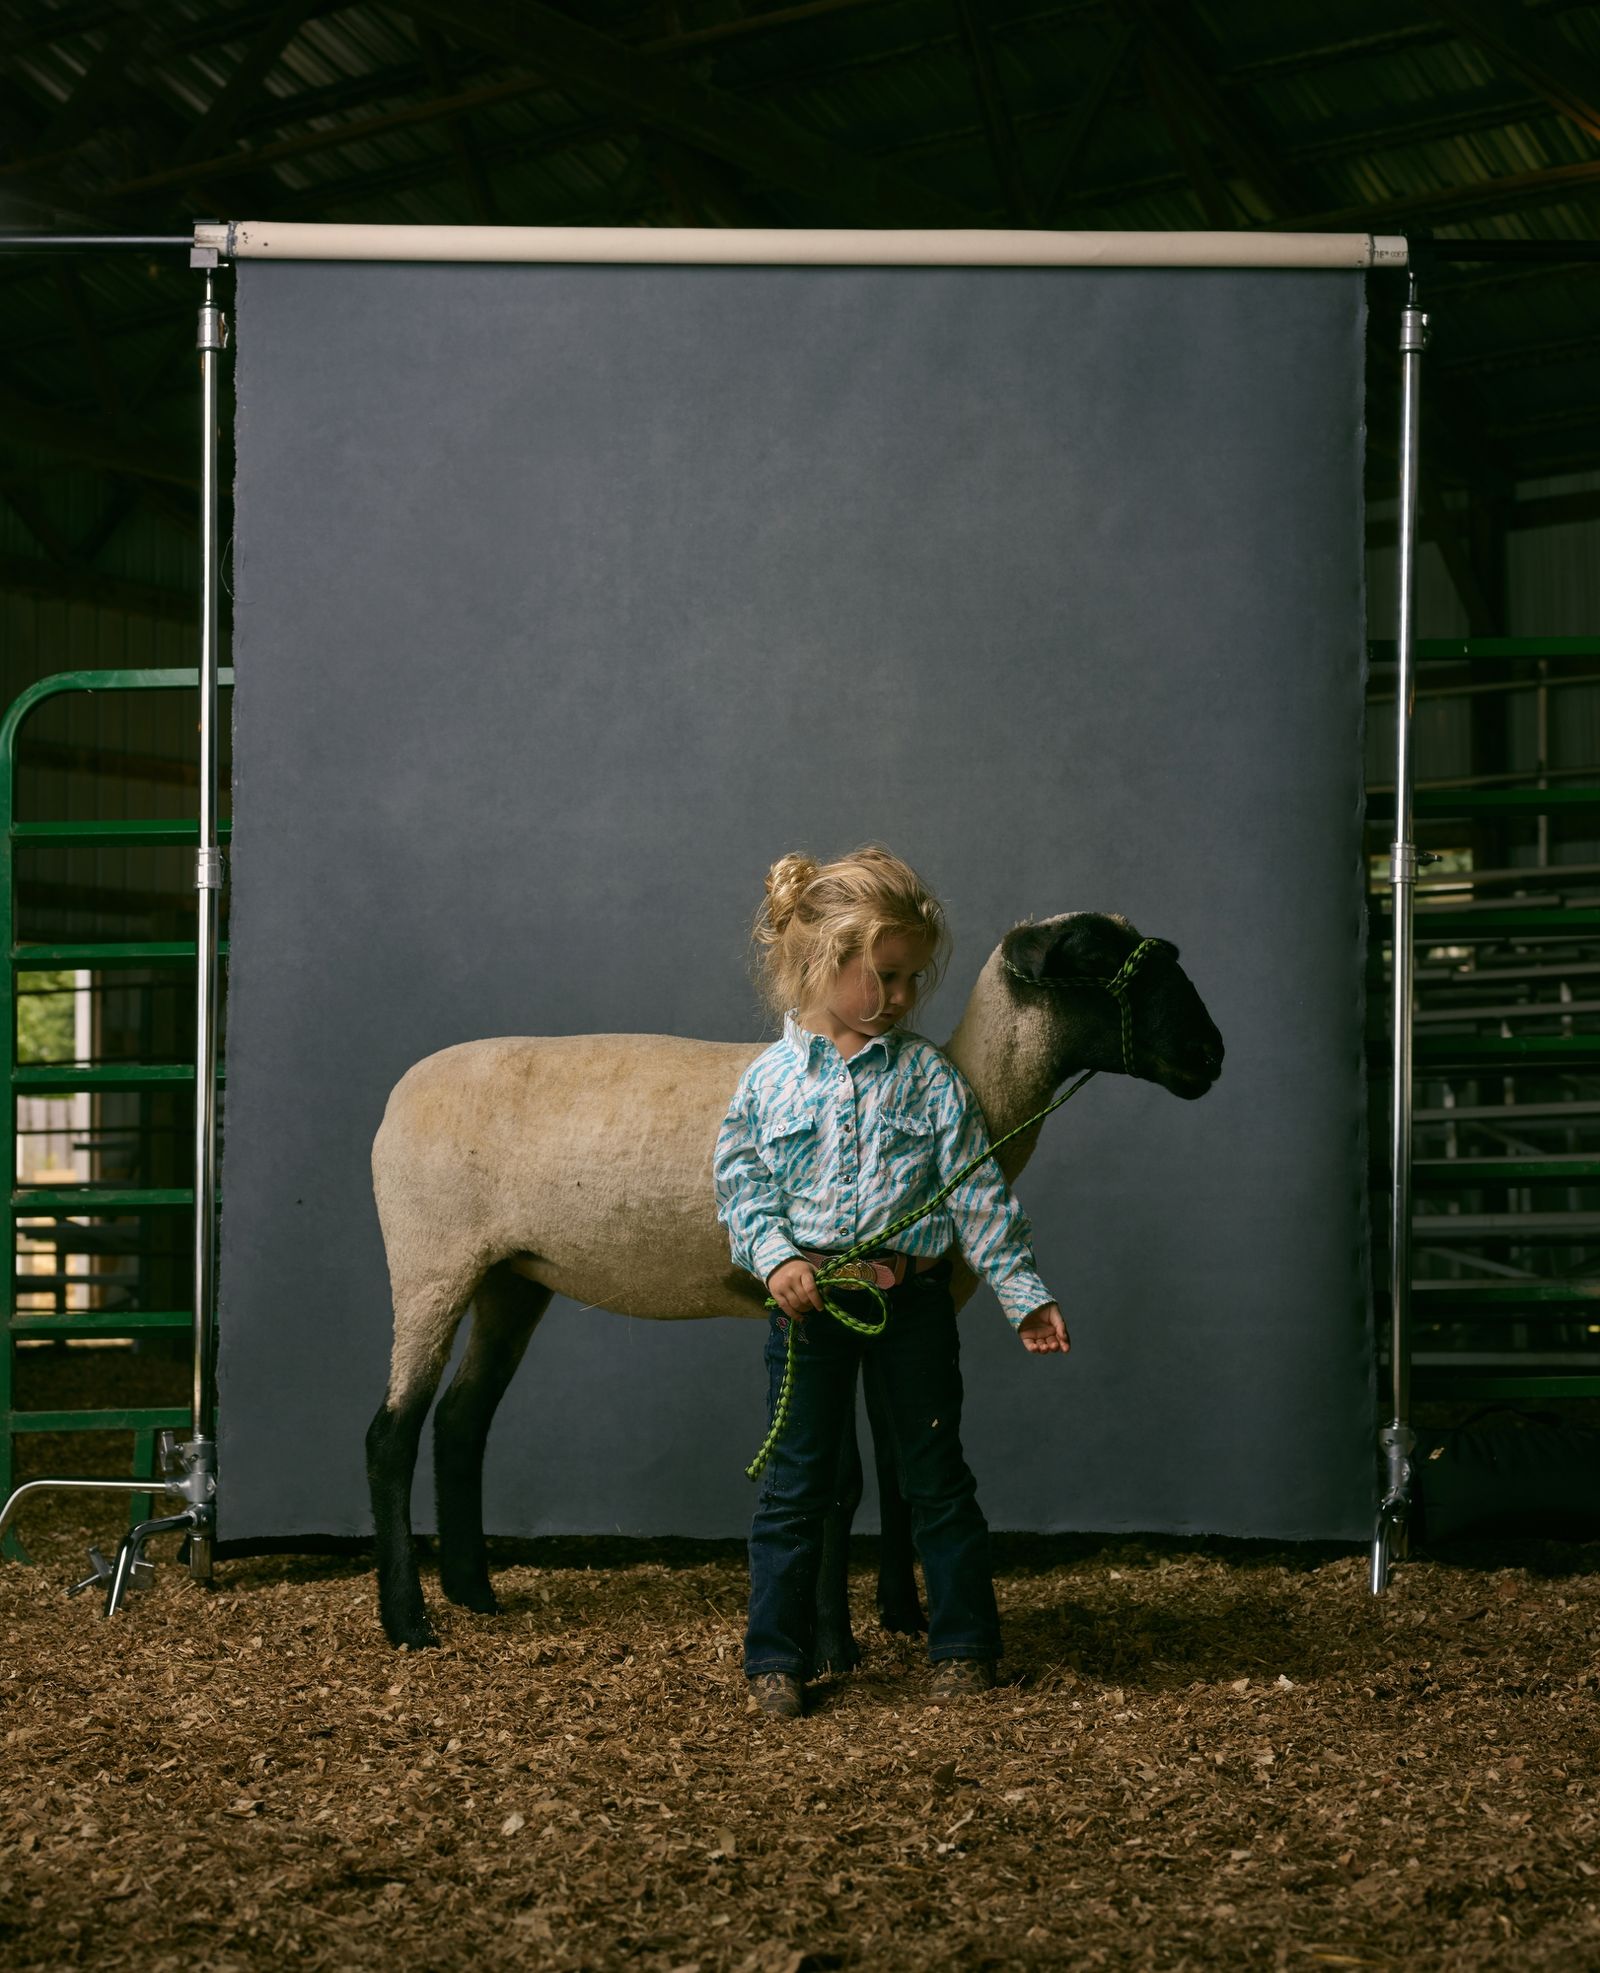 © R. J. Kern - Rylee and Nelly, Clay County Fair, Minnesota, 2016.